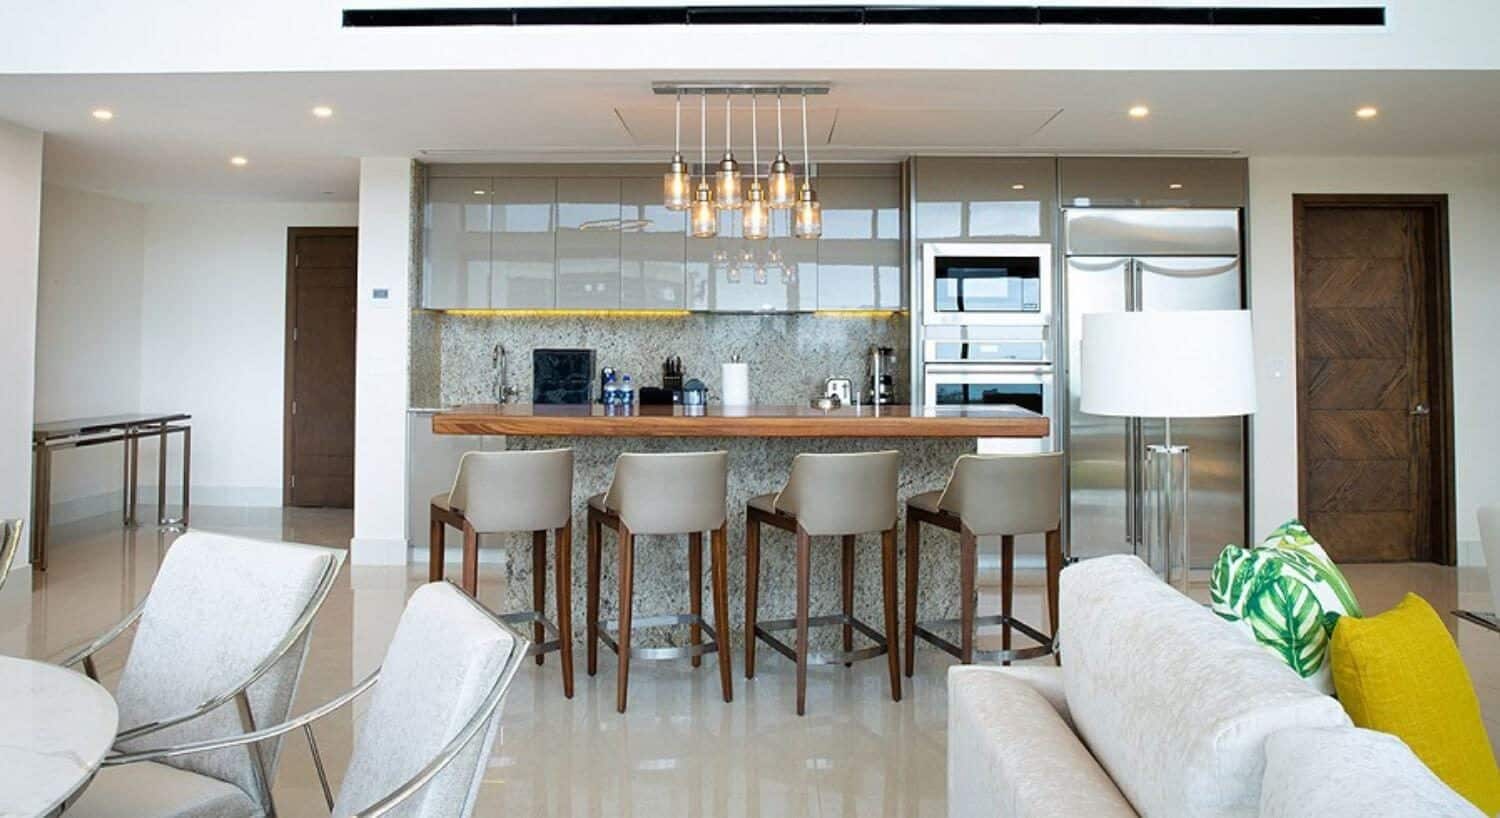 A gourmet kitchen with stainless steel appliances, a breakfast bar with four barstools, a dining table and chairs, and a plush sofa and floor lamp.